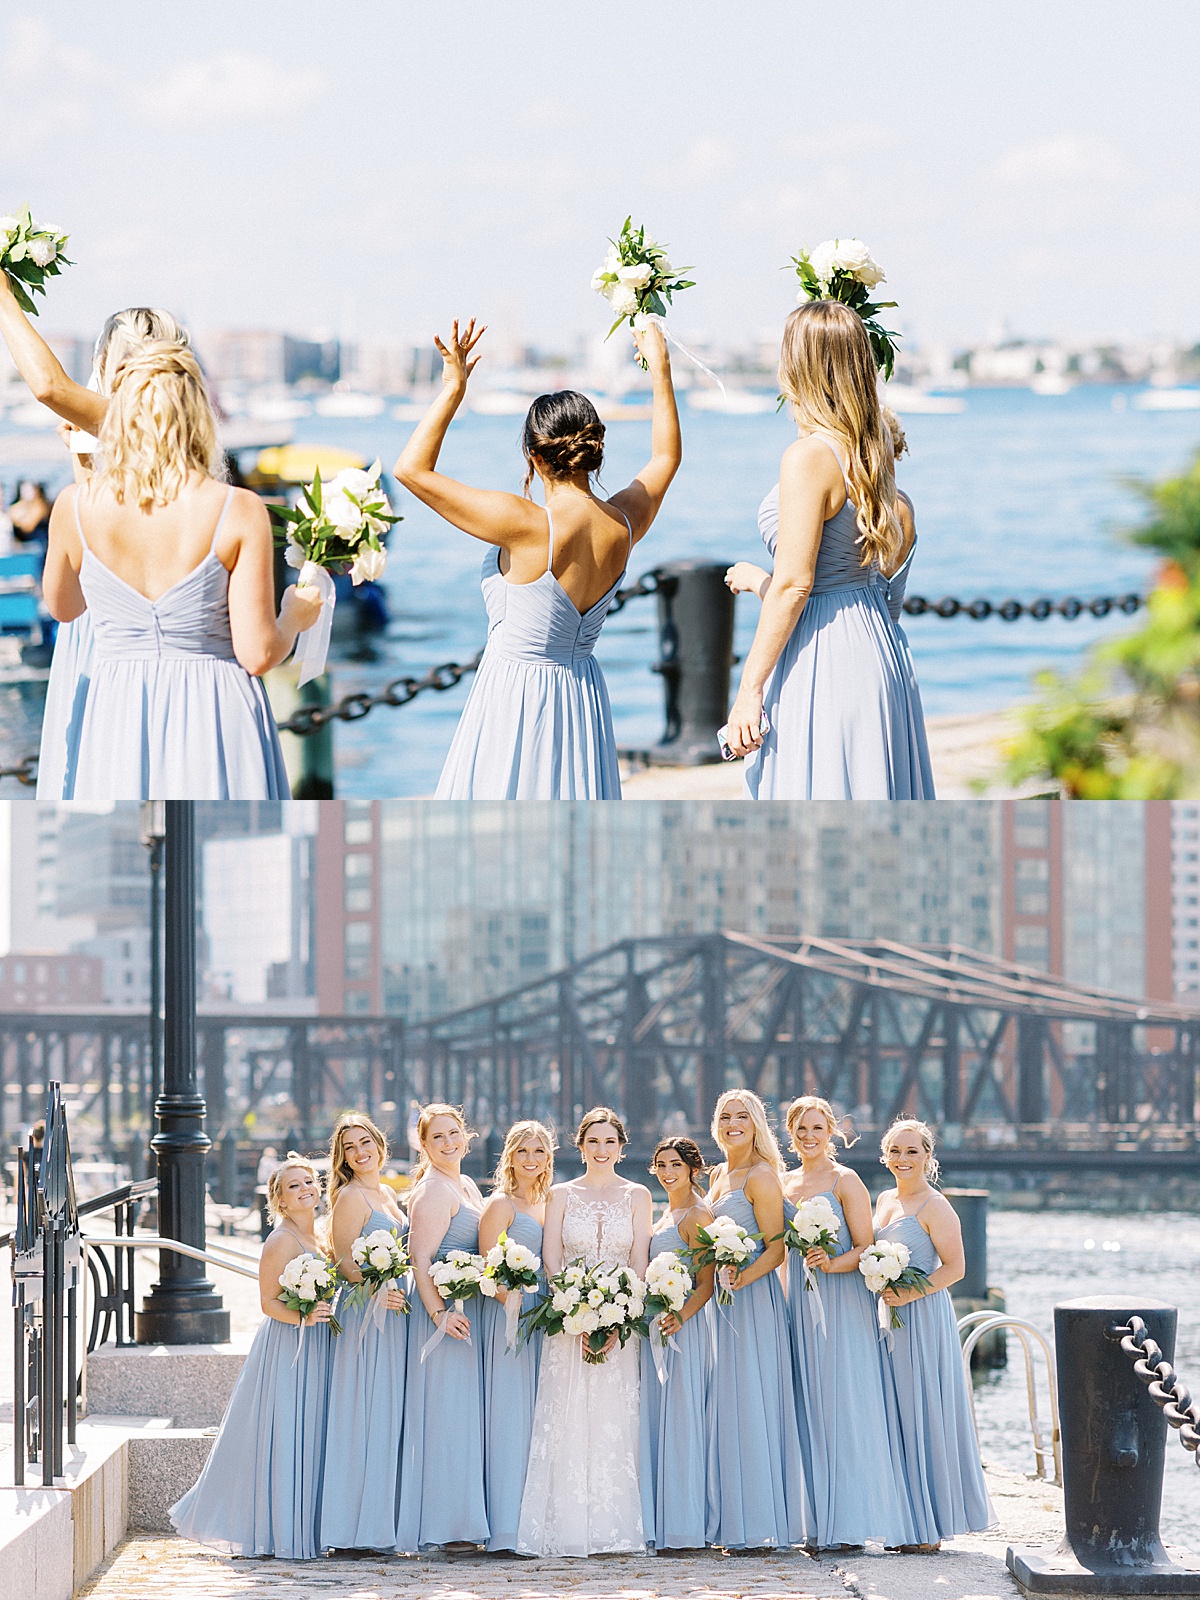 bridesmaids in pale blue with white flowers join bride in lace gown on Boston pier before nautical oceanview wedding